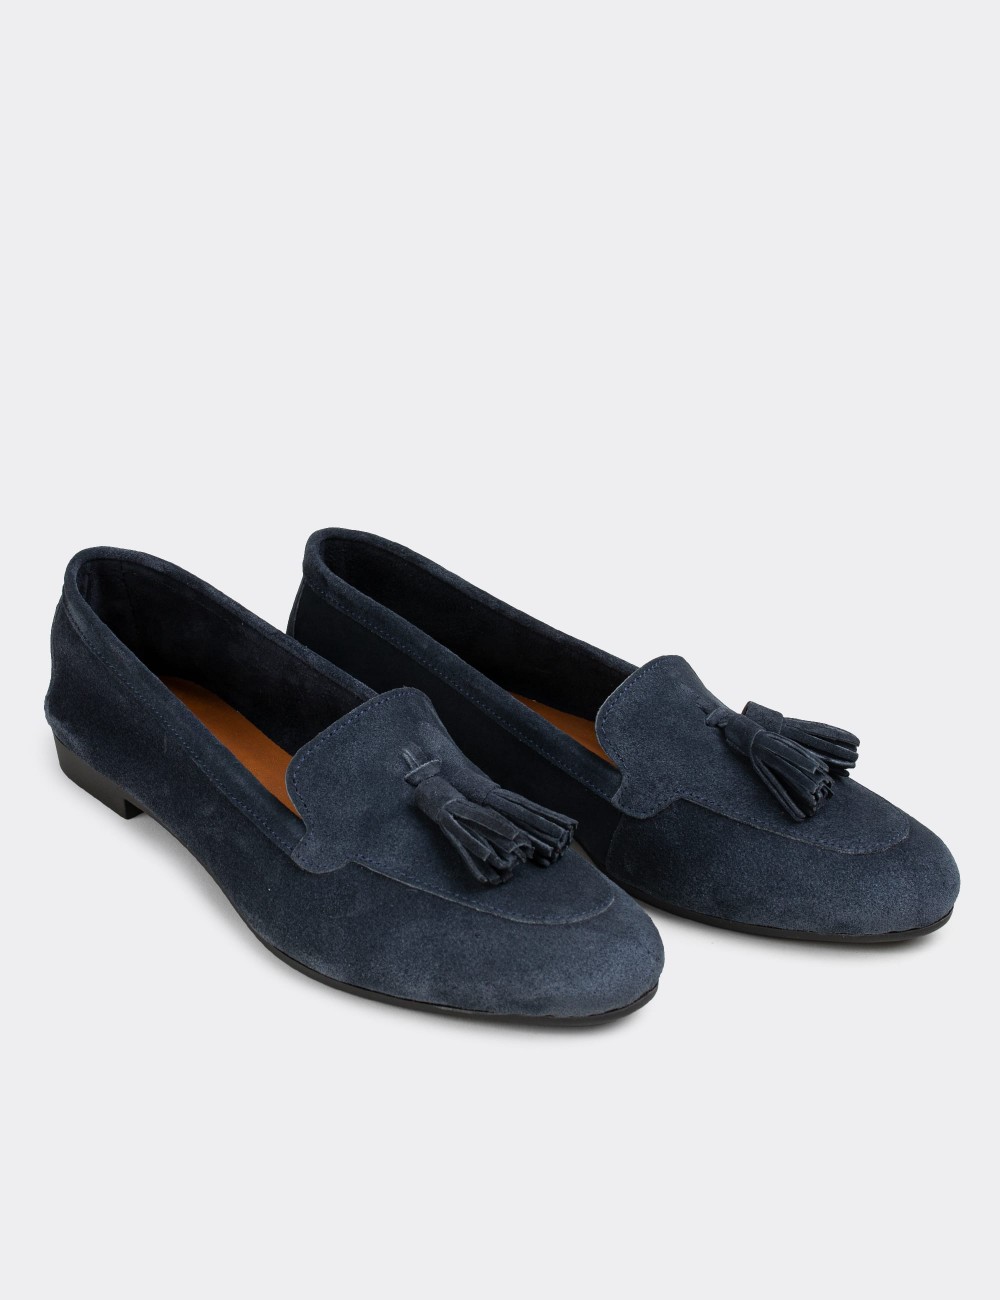 Navy Suede Leather Loafers - E3209ZFUMC01